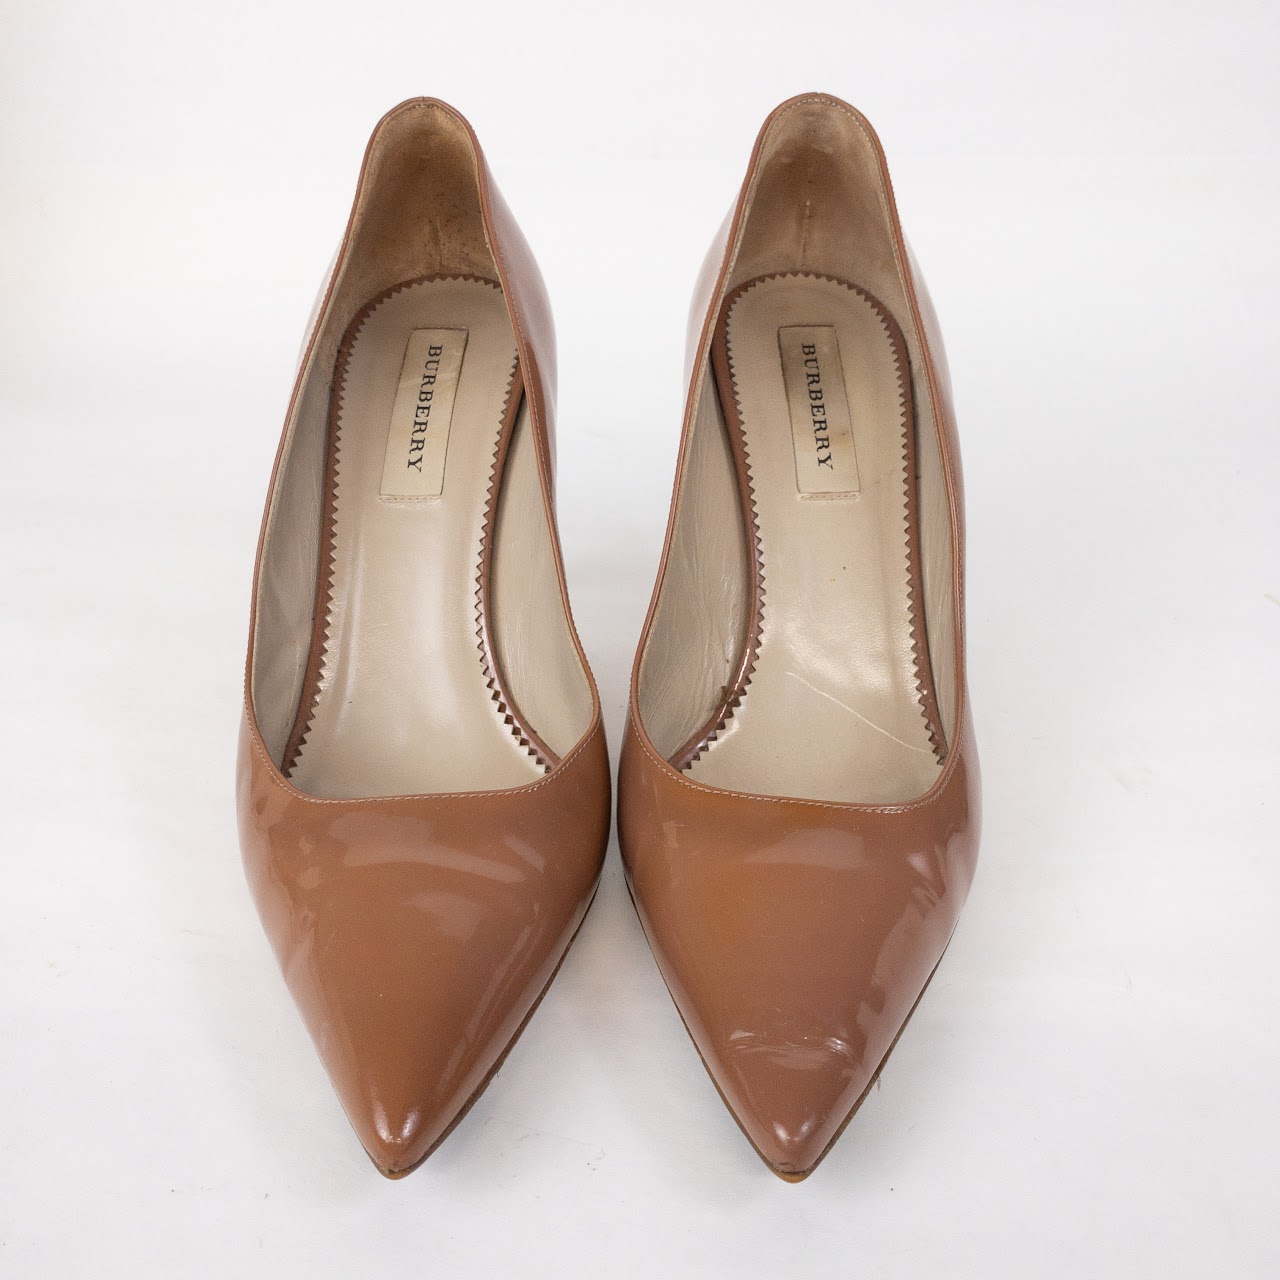 Burberry Patent Leather Rosewood Pumps